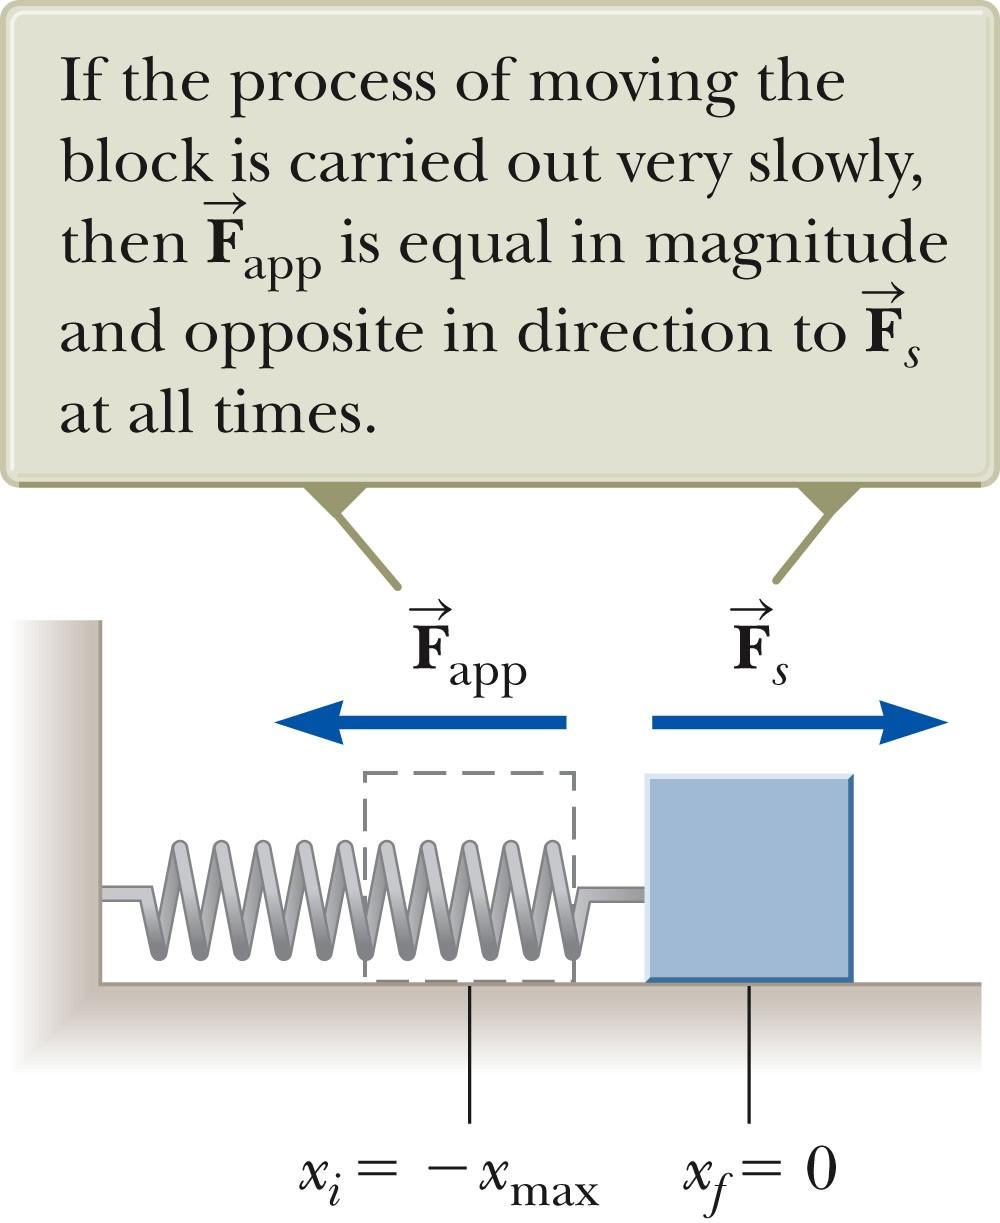 Spring with an Applied Force Suppose an external agent, F app, stretches the spring. The applied force is equal and opposite to the spring force. F app F 垐 appi Fs kxi kx?